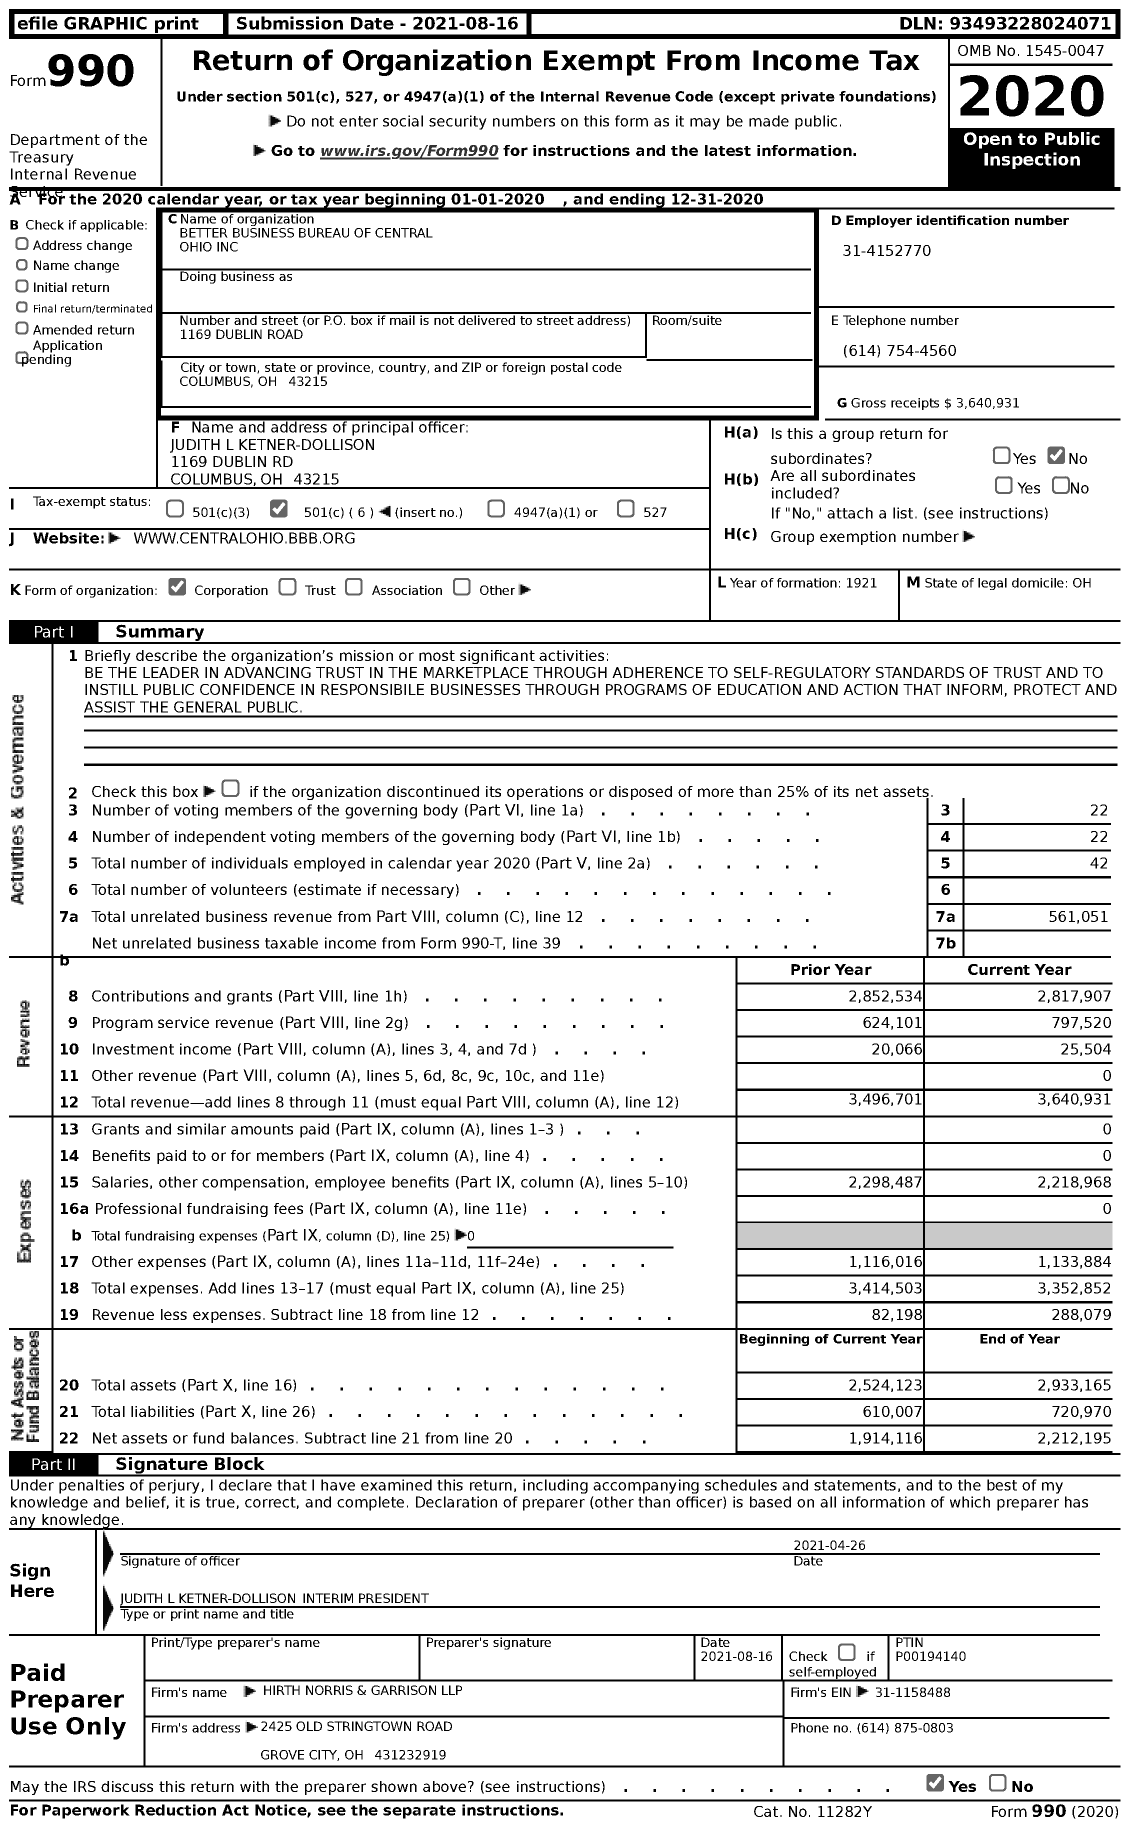 Image of first page of 2020 Form 990 for Better Business Bureau of Central Ohio (BBB)